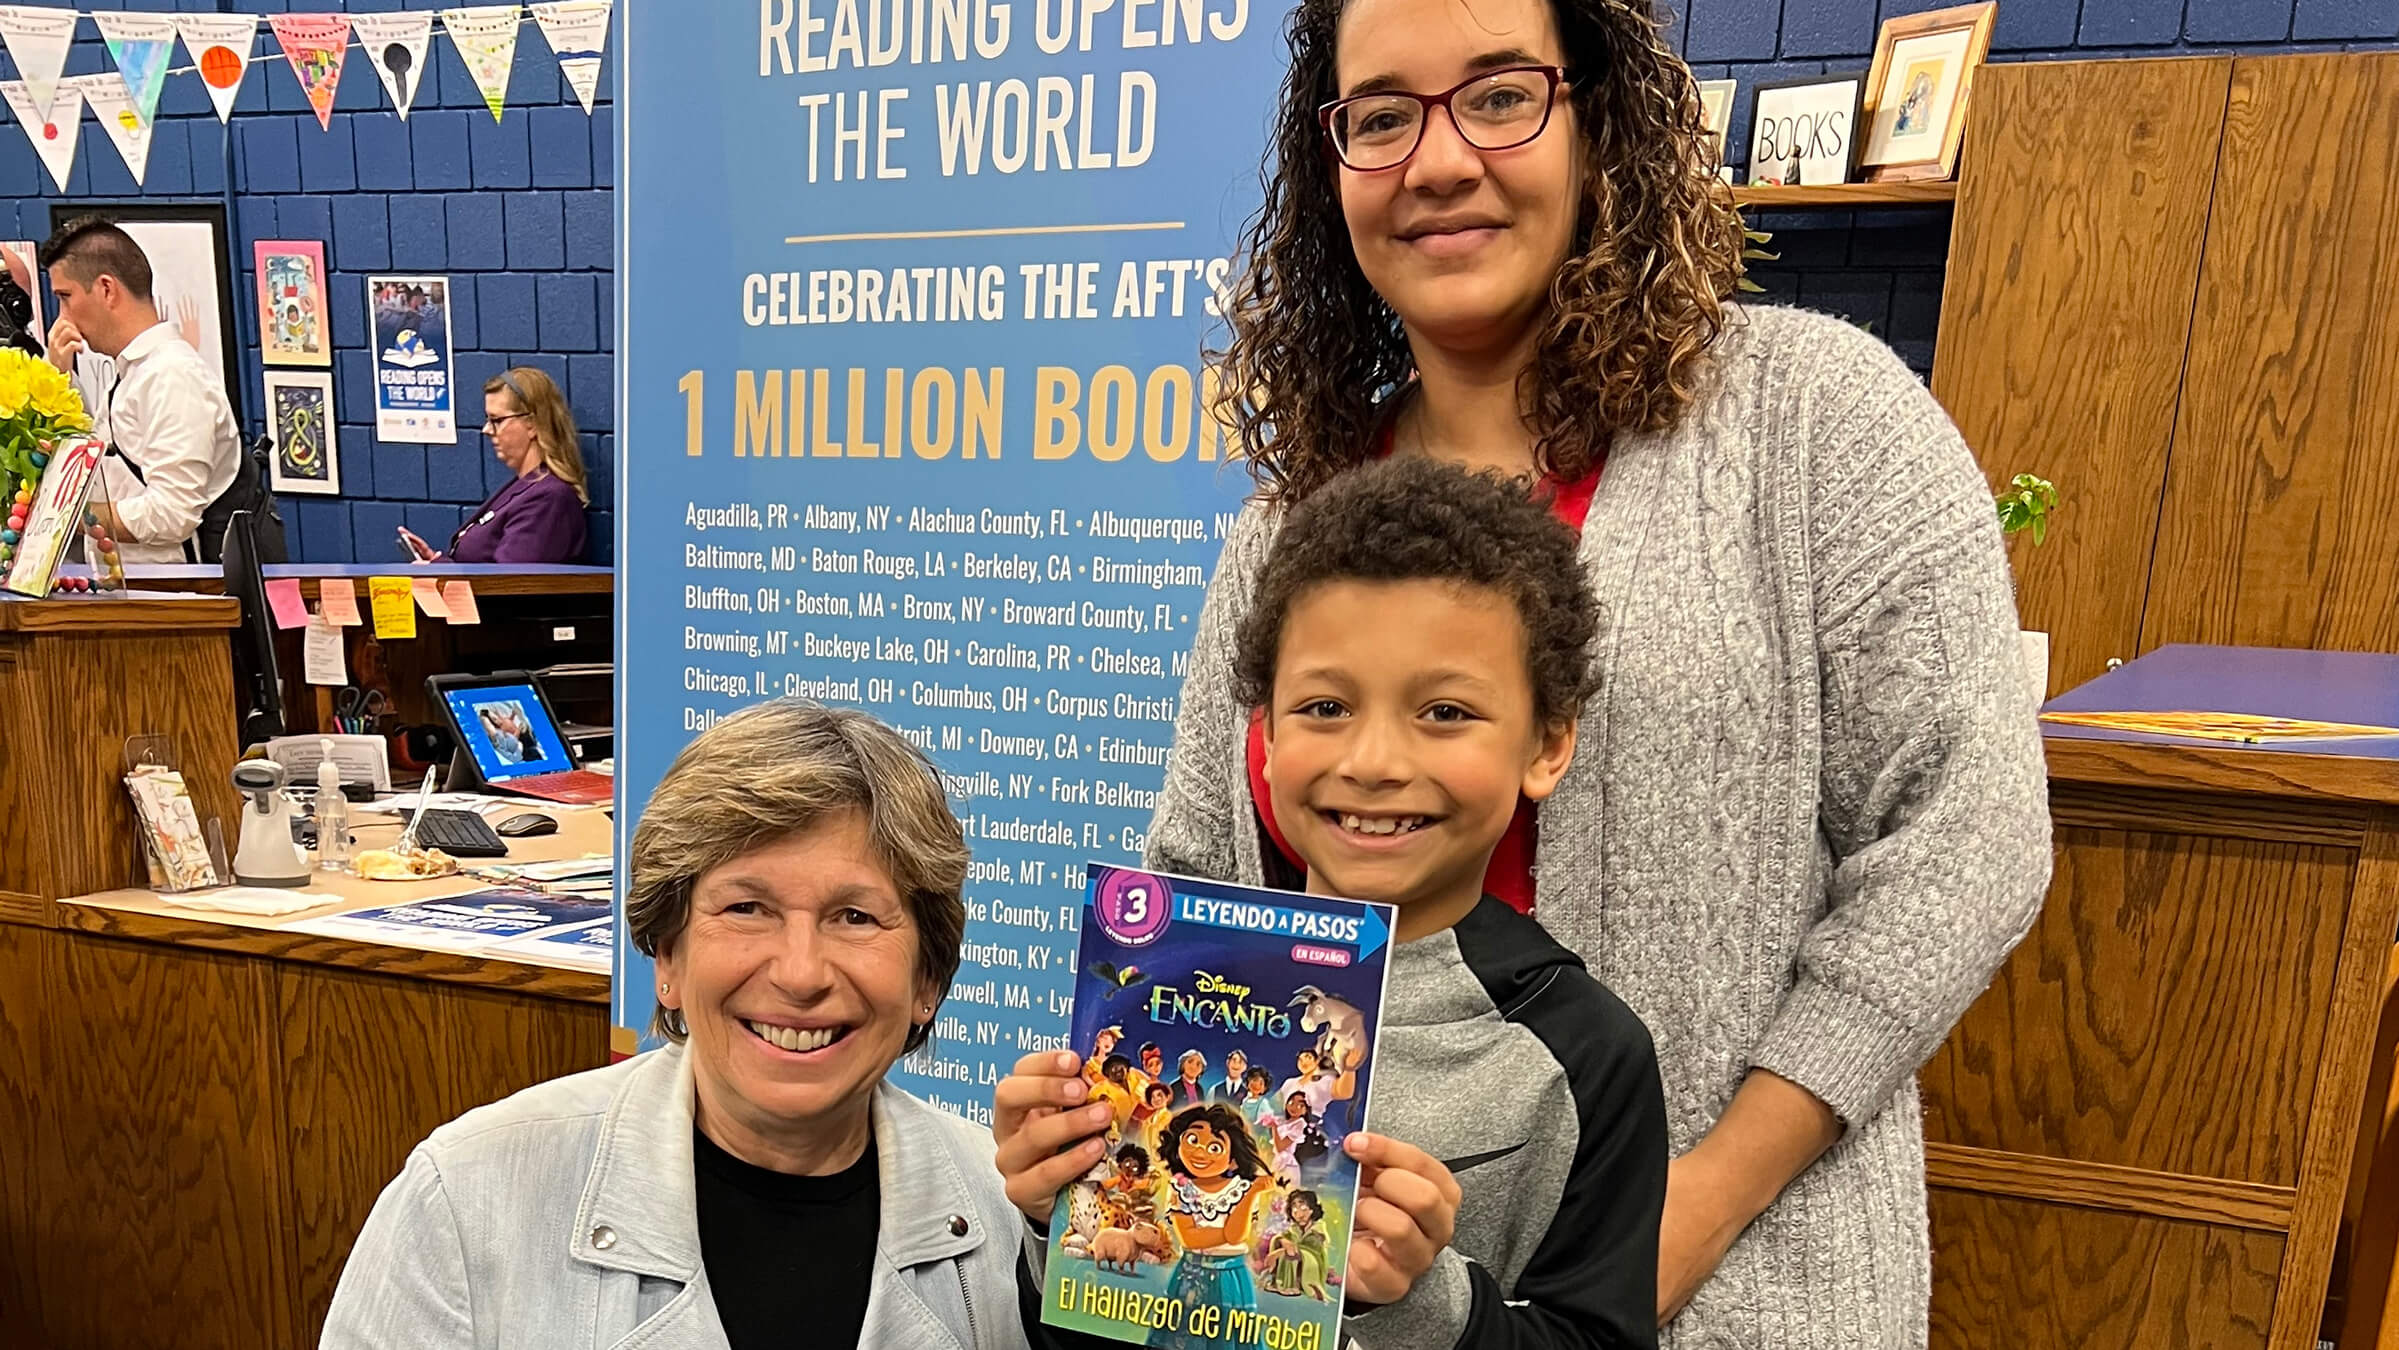 Weingarten, left, visits Cloud Elementary in Wichita, Kan., on April 20 to highlight the AFT’s Reading Opens the World campaign.